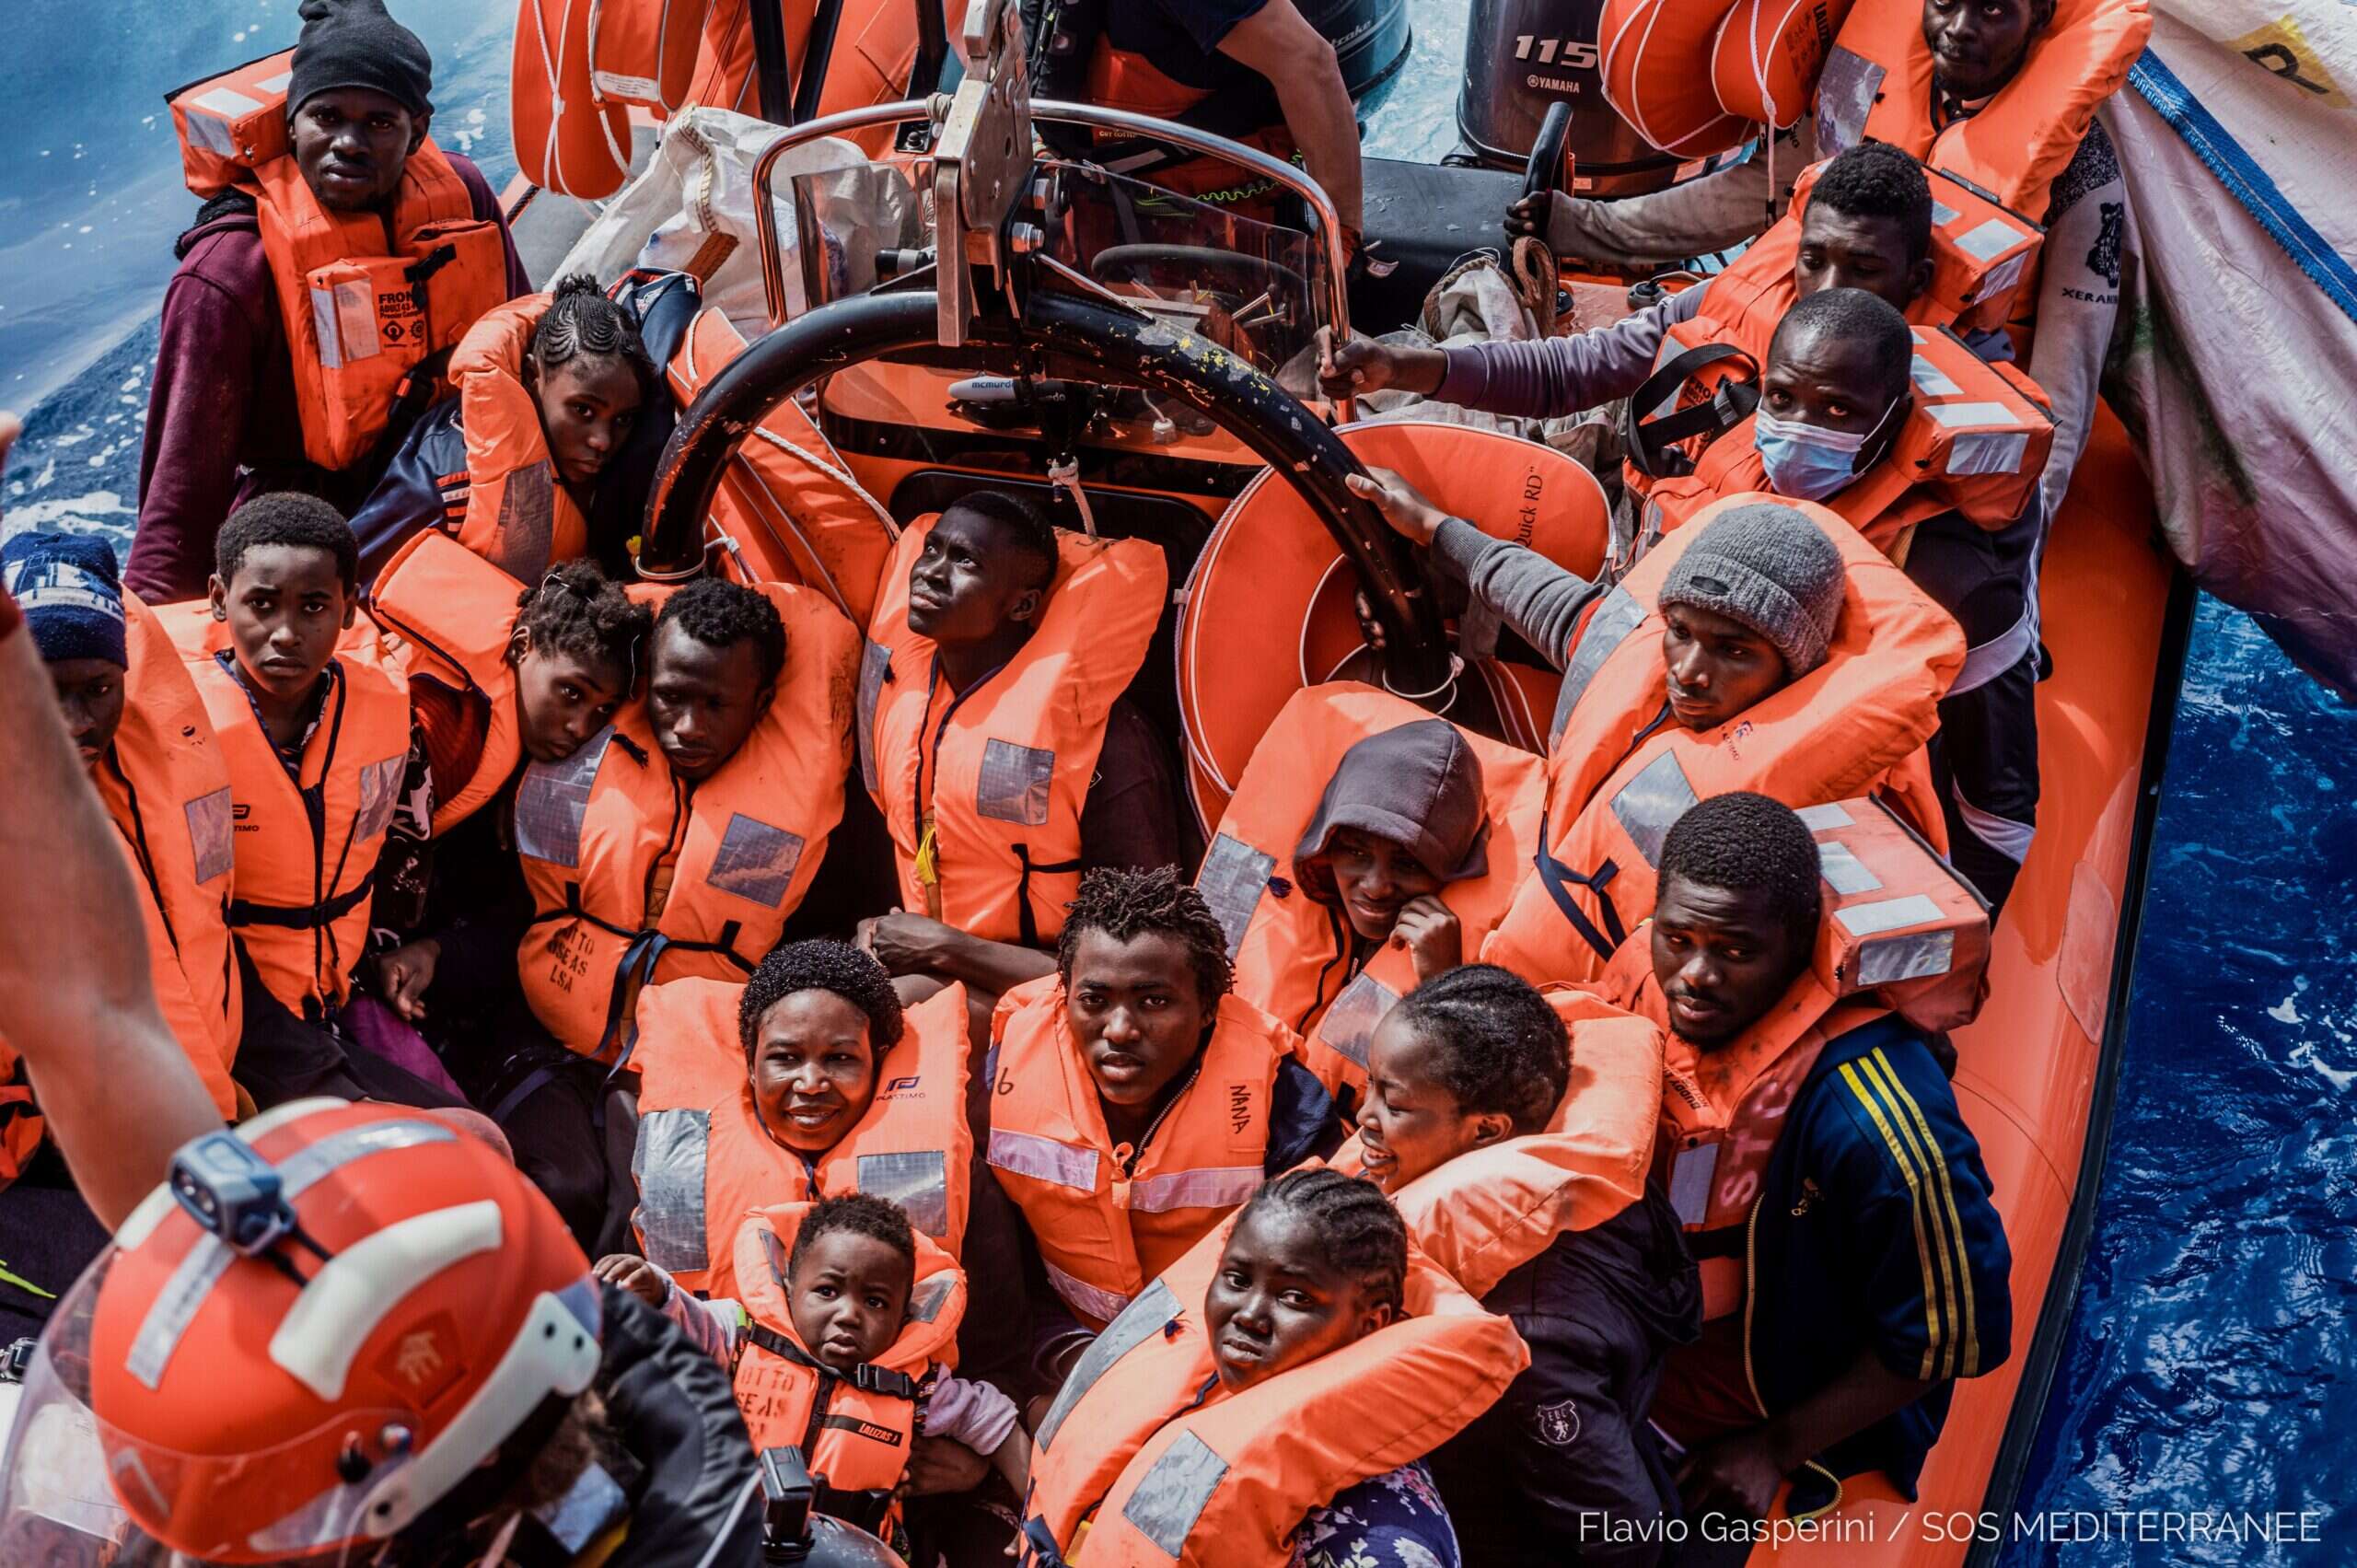 As the Mediterranean’s migrant tragedy deepens, Europe looks away